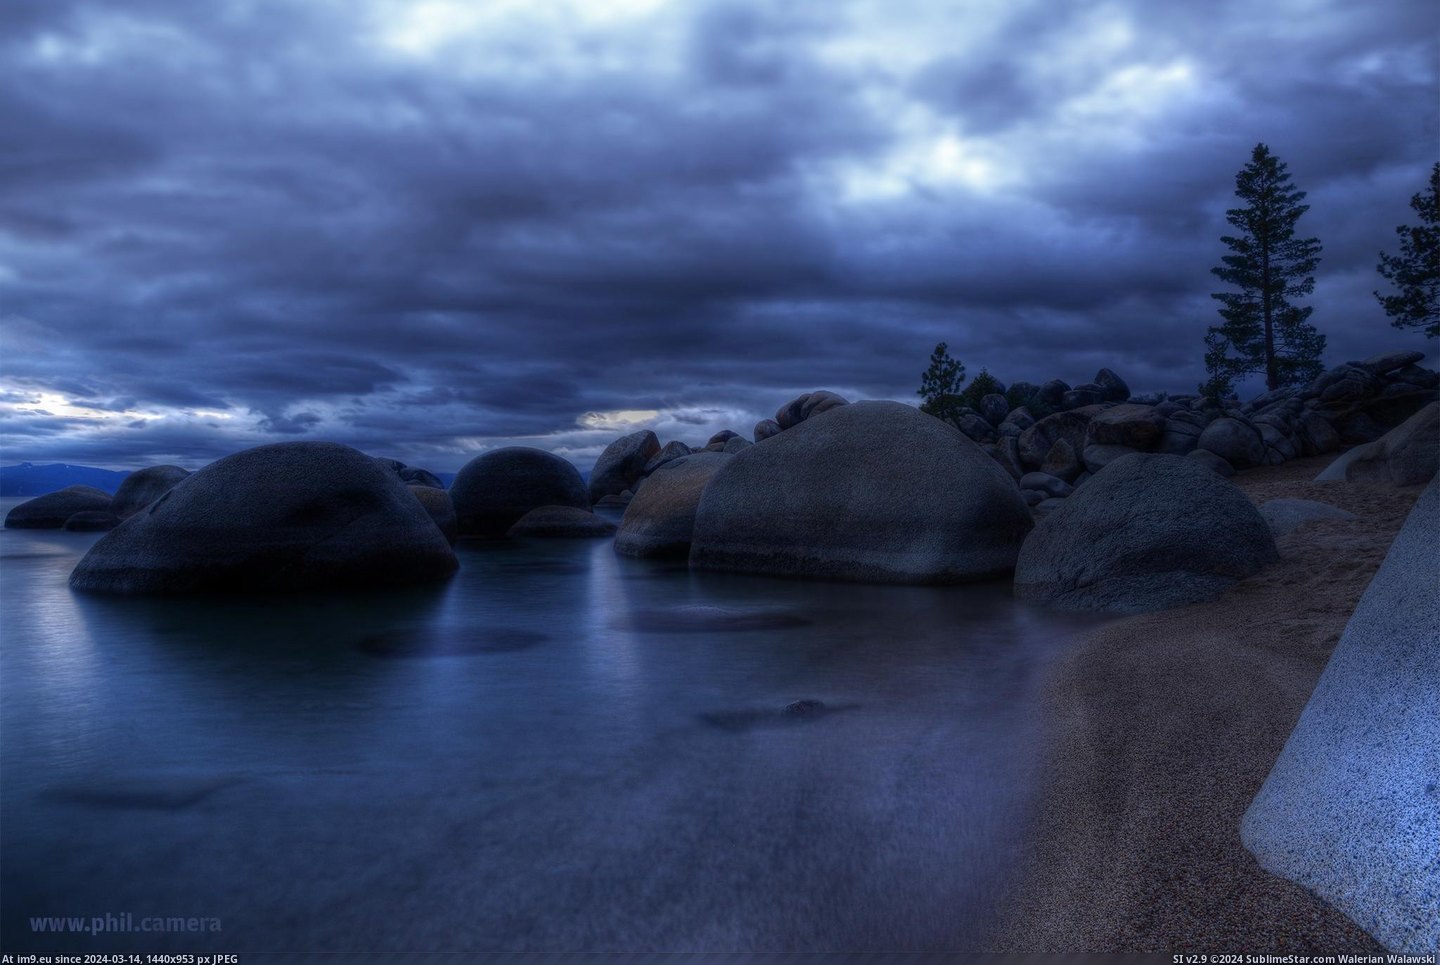 #Lake #Water #East #Skies #2048x1367 #Tahoe #Surreal #Shore [Earthporn] Stilled Water and Surreal Skies over east shore, Lake Tahoe, last weeked [oc][2048x1367] Pic. (Obraz z album My r/EARTHPORN favs))